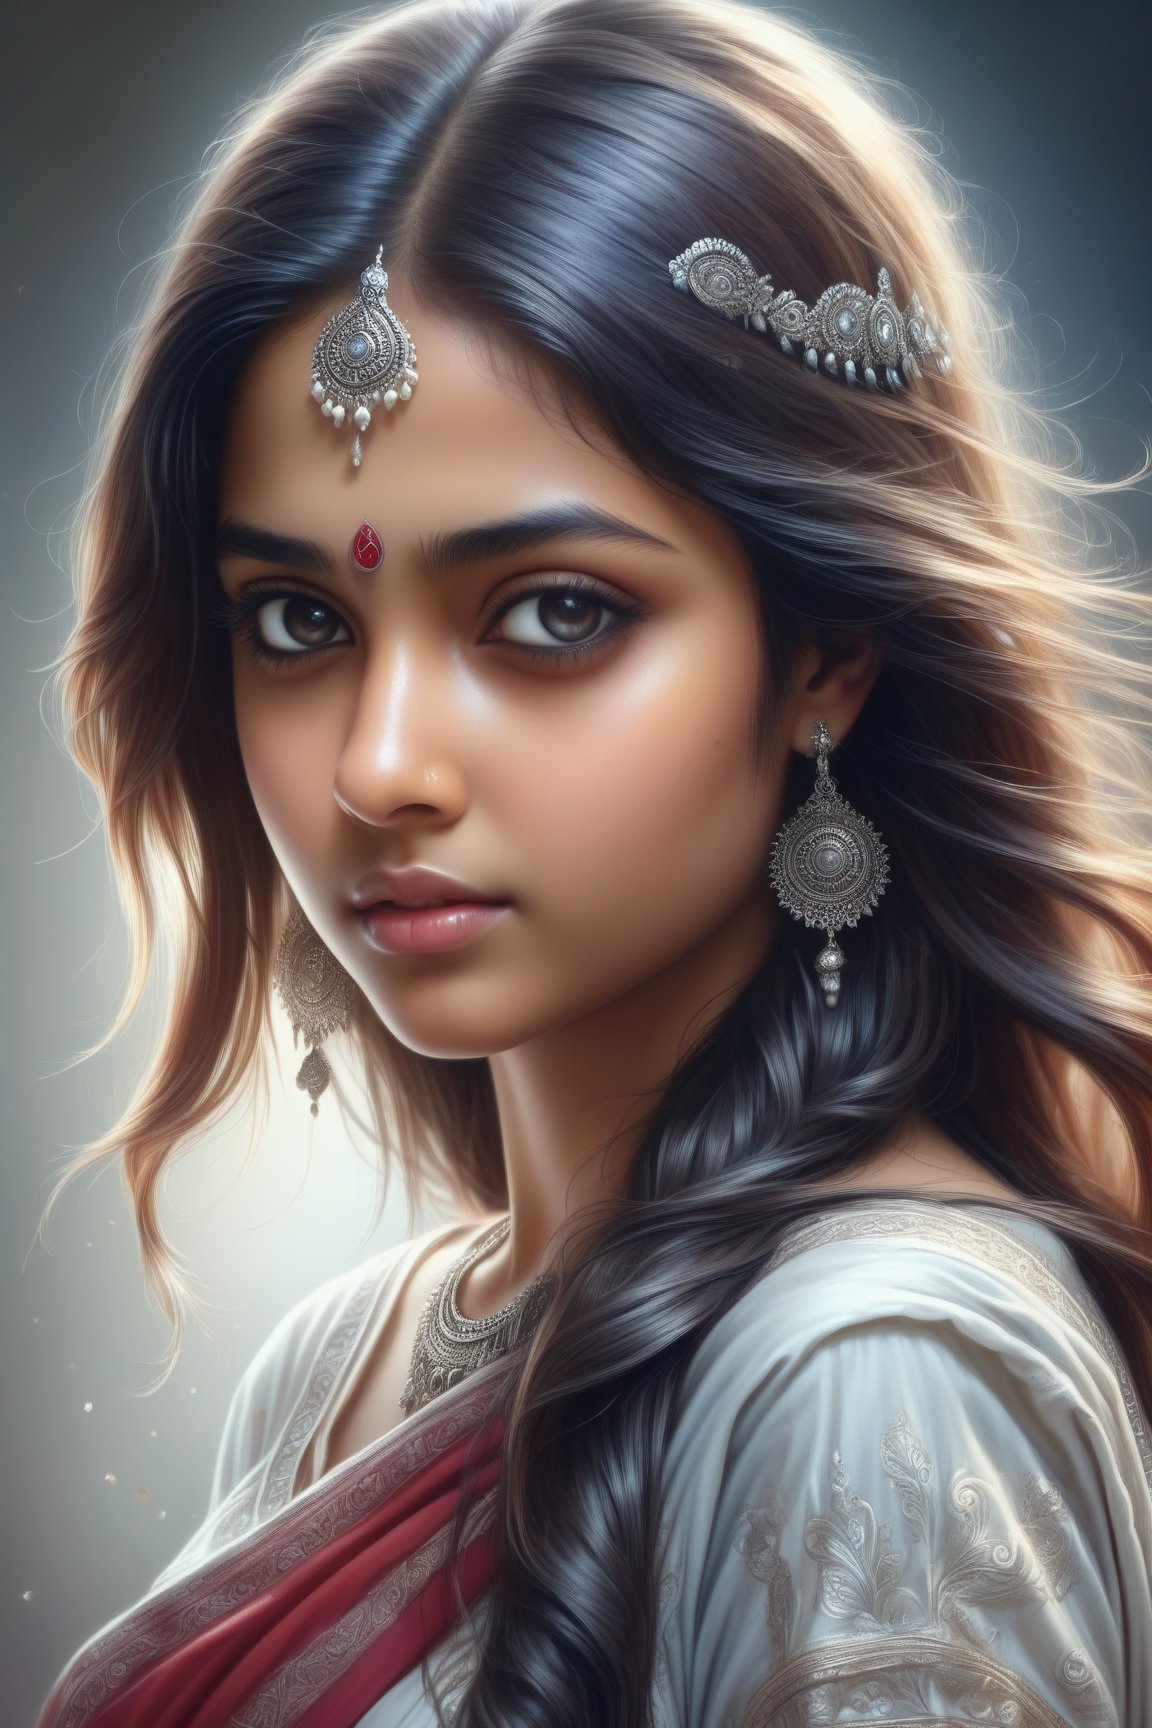 beautiful Indian girl, 23 year old, artist's sketch, realistic, pencil drawing, pencil sketch, digital_drawing, artwork, artwork_(digital), digital_art, digital_artworks, sketch, painting, ,zwuul,DonMM1y4XL,DonMSn0wM4g1cXL,DonMDr4g0nXL,Insta Model,more detail XL